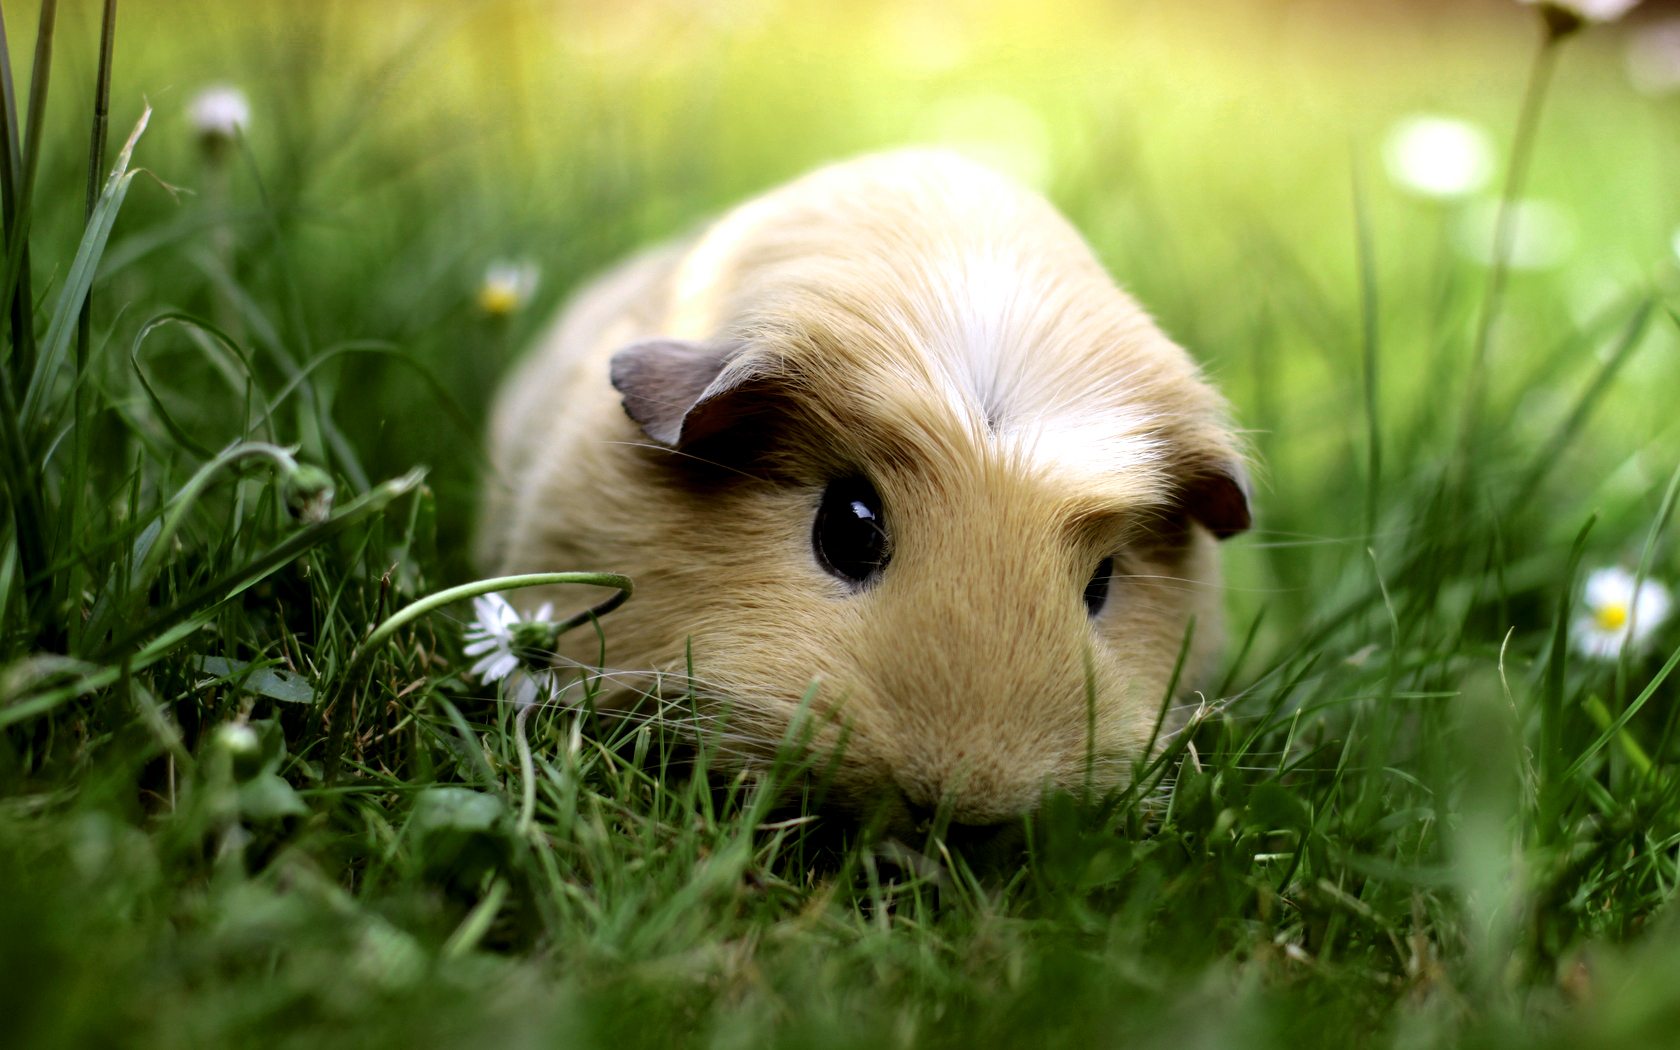 Free download Cute Baby Pigs 11121 HD Wallpaper in Animals Imagecicom [1680x1050] for your Desktop, Mobile & Tablet. Explore Cute Pig Wallpaper. Cute Guinea Pig Wallpaper, Baby Pig Desktop Wallpaper, Pigs Wallpaper